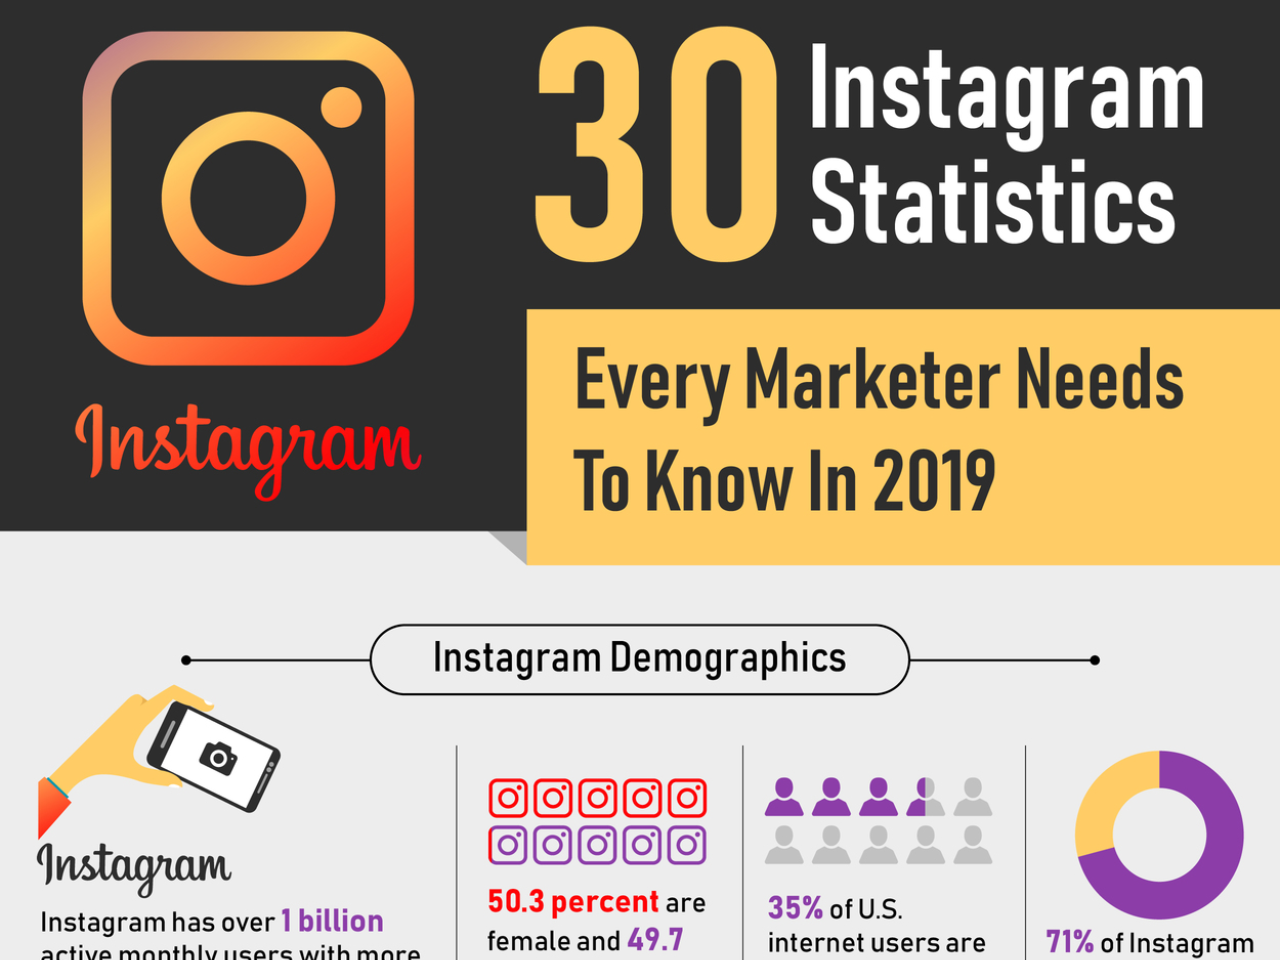 30 Instagram Statistics – Every Marketer Needs To Know In 2019